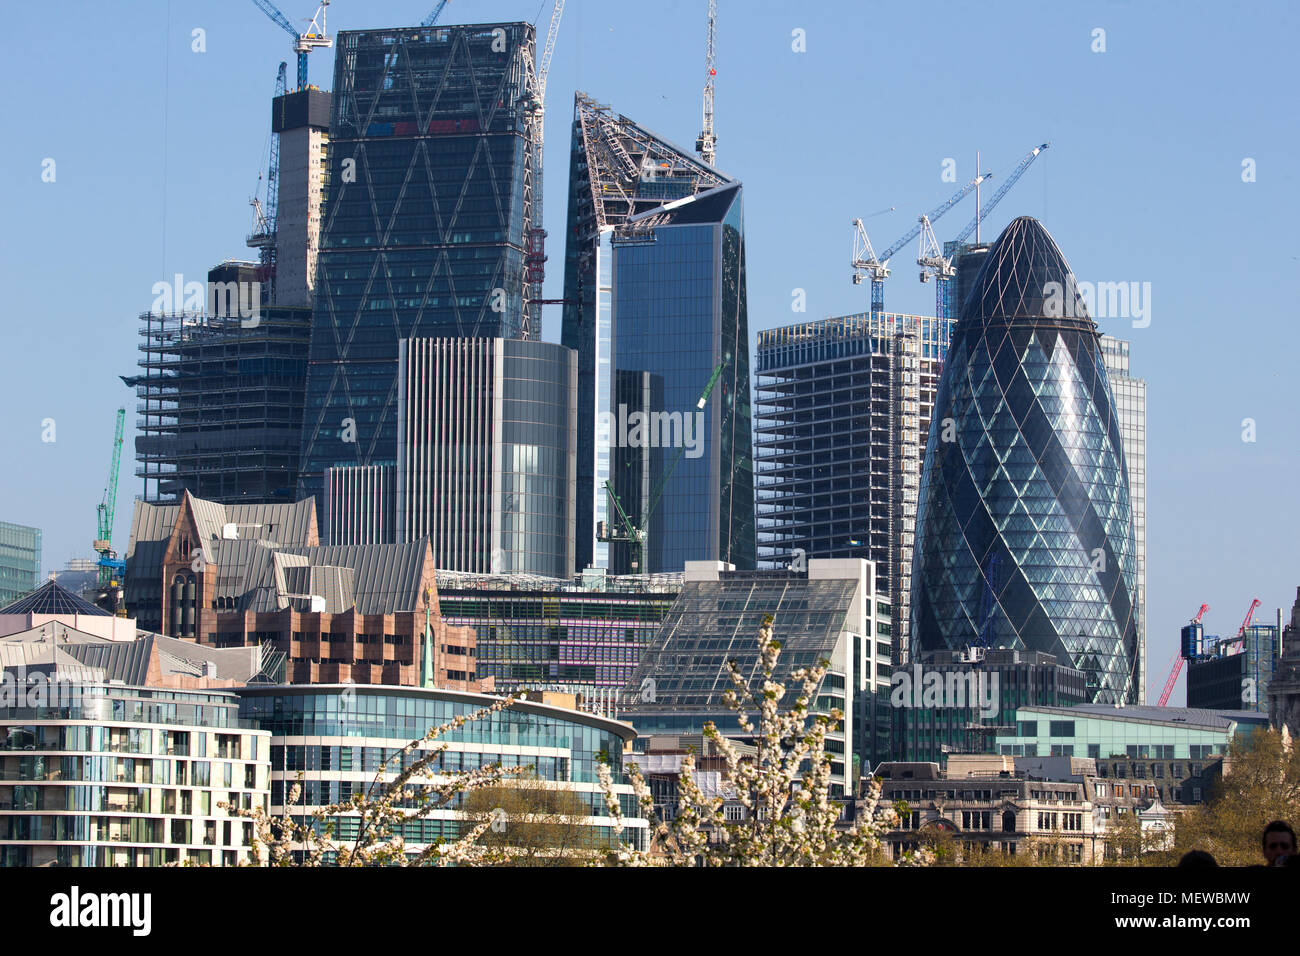 View of financial area of The City of London including 30 St Mary Axe and 122 Leadenhall Street known as The Gherkin and The Cheesegrater respectively Stock Photo